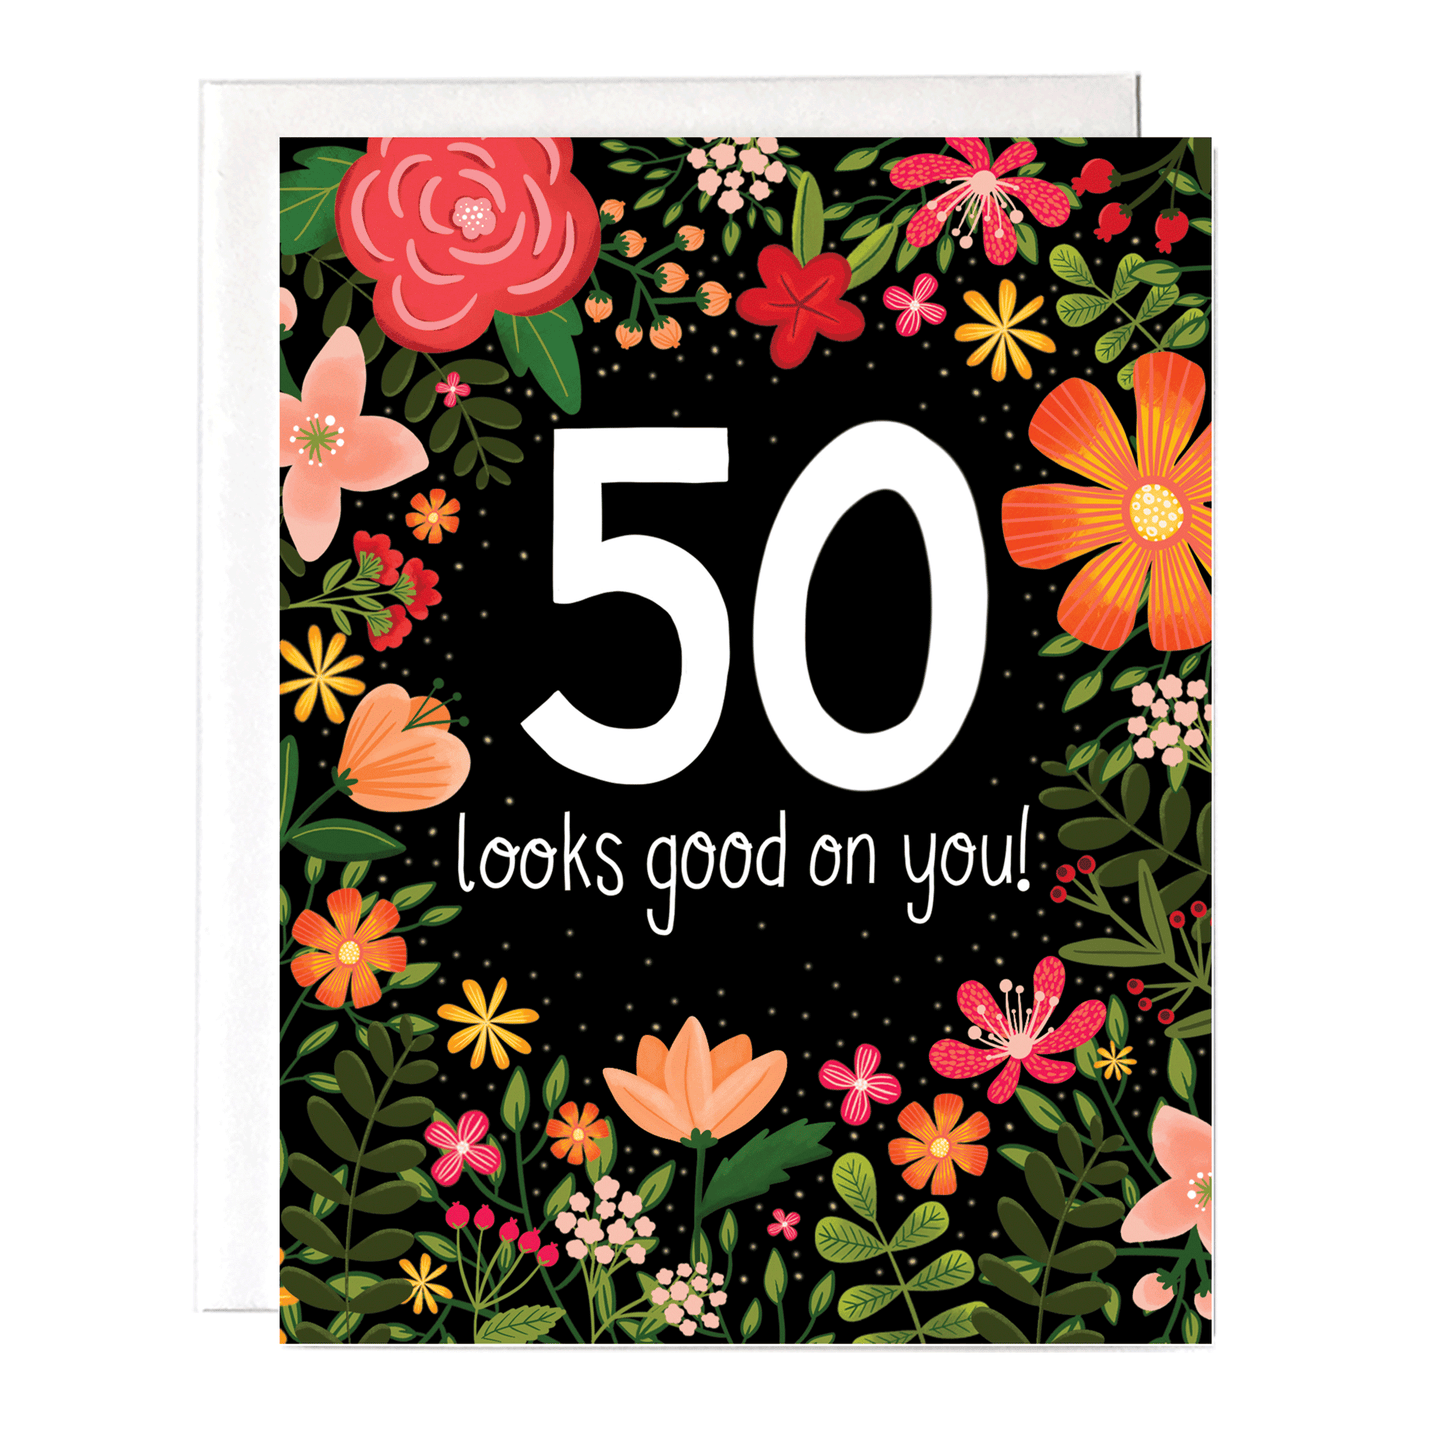 50 looks good on you 50th birthday card with flowers